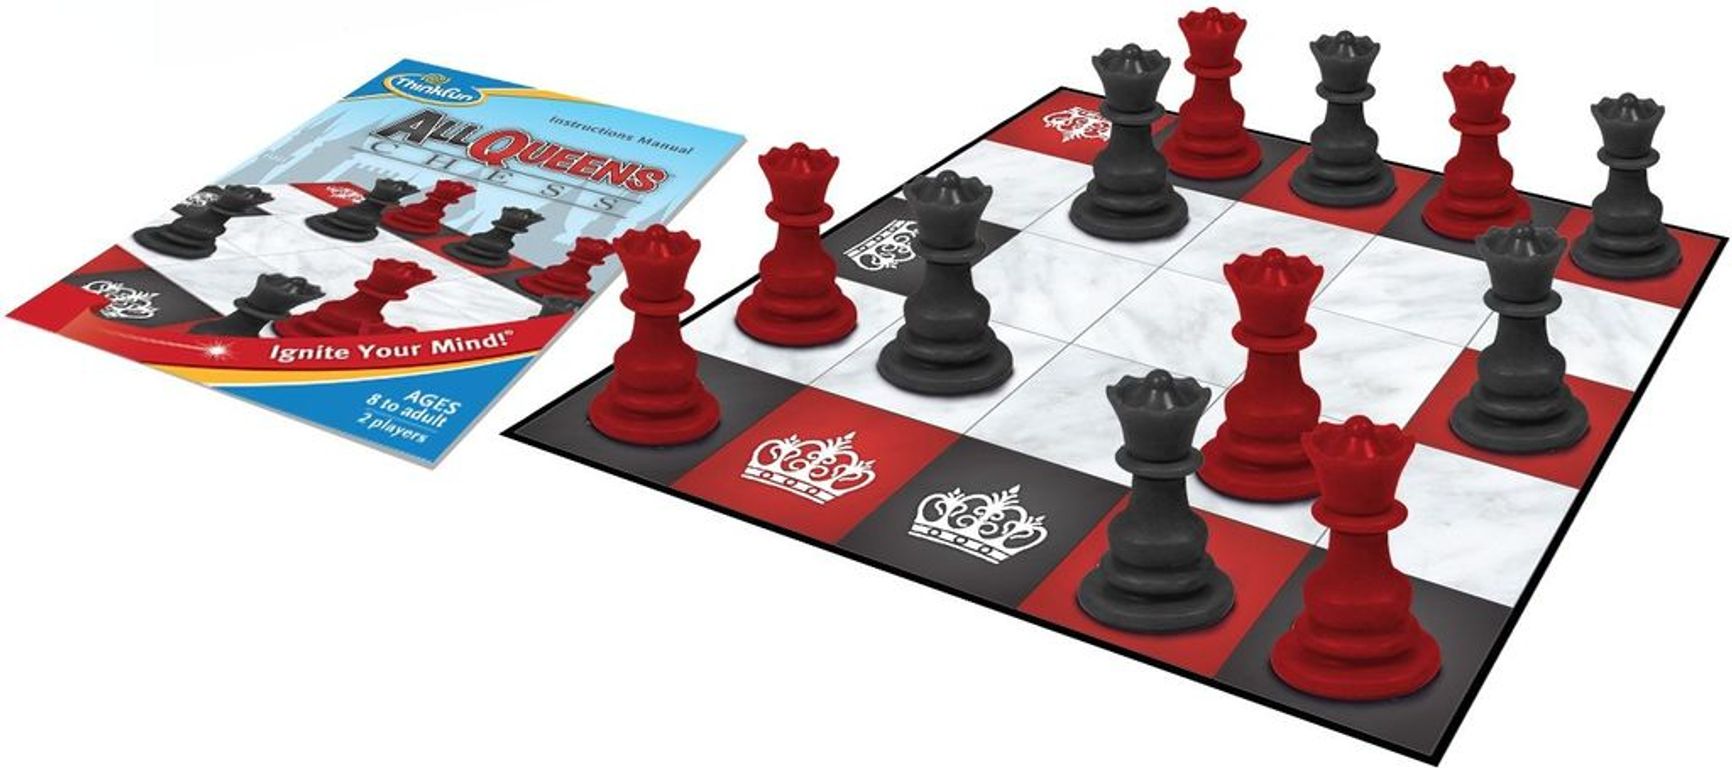 All Queens Chess components